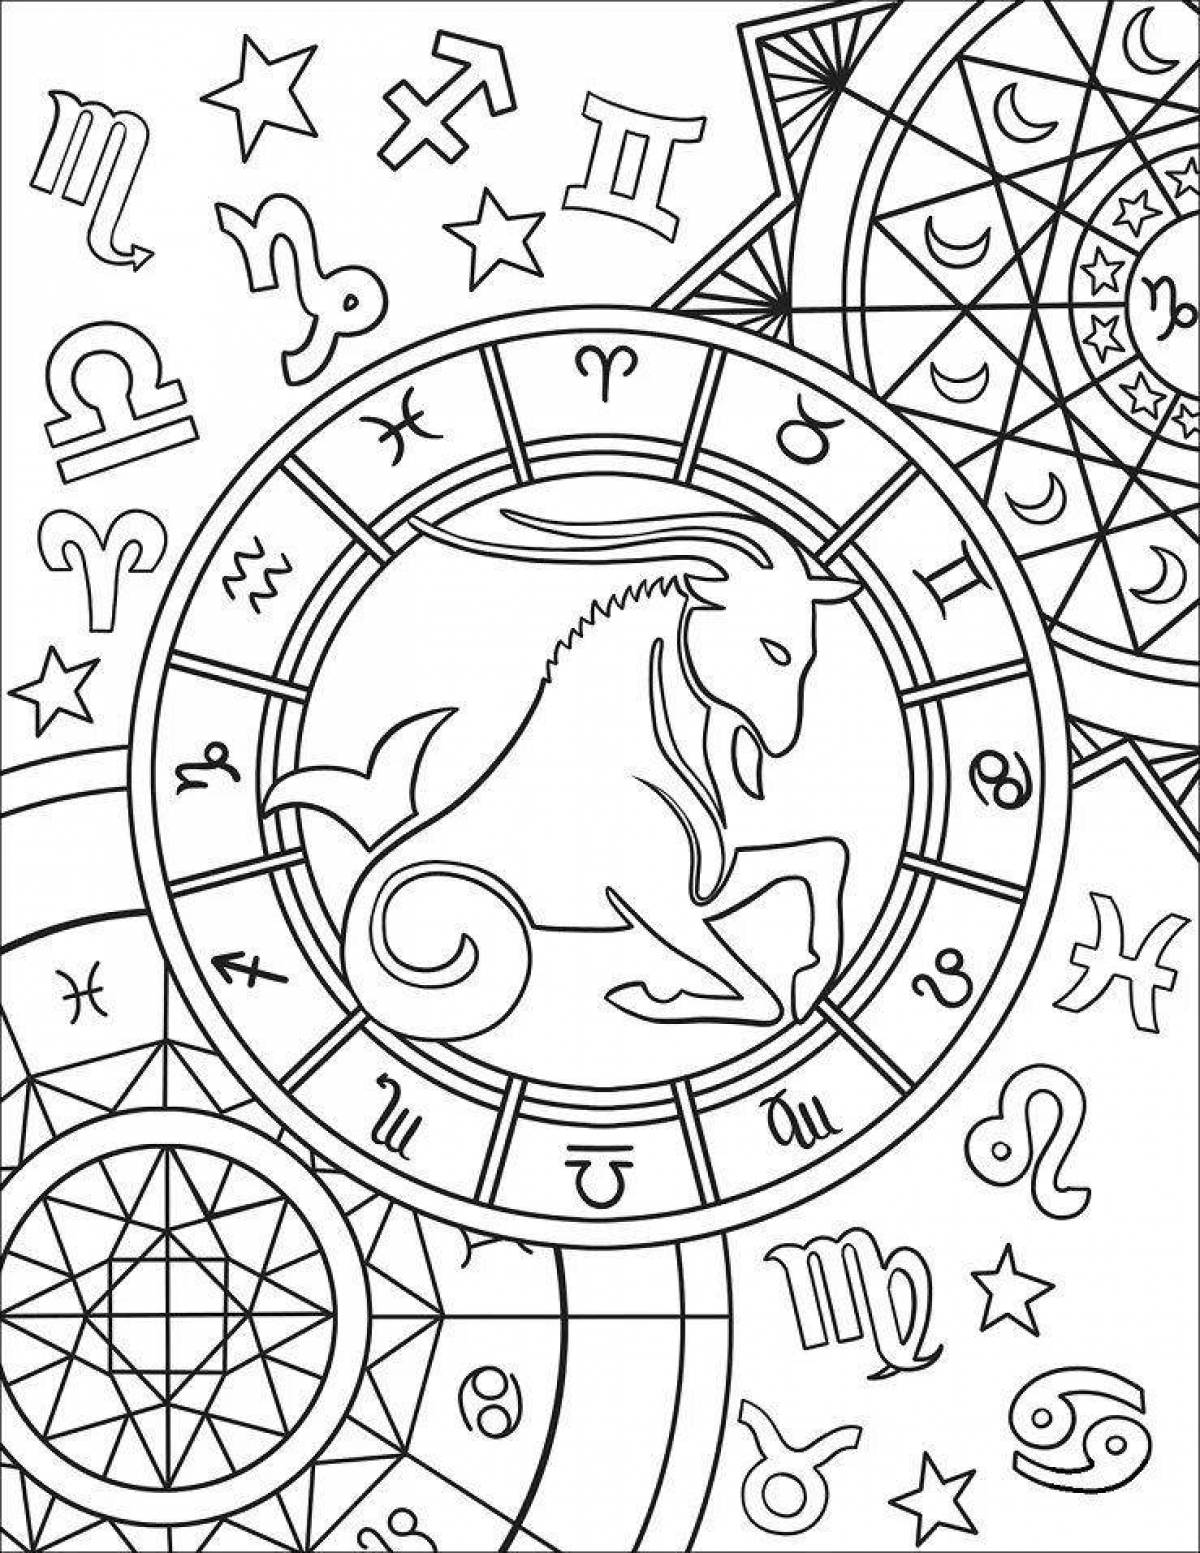 Glorious Capricorn coloring page